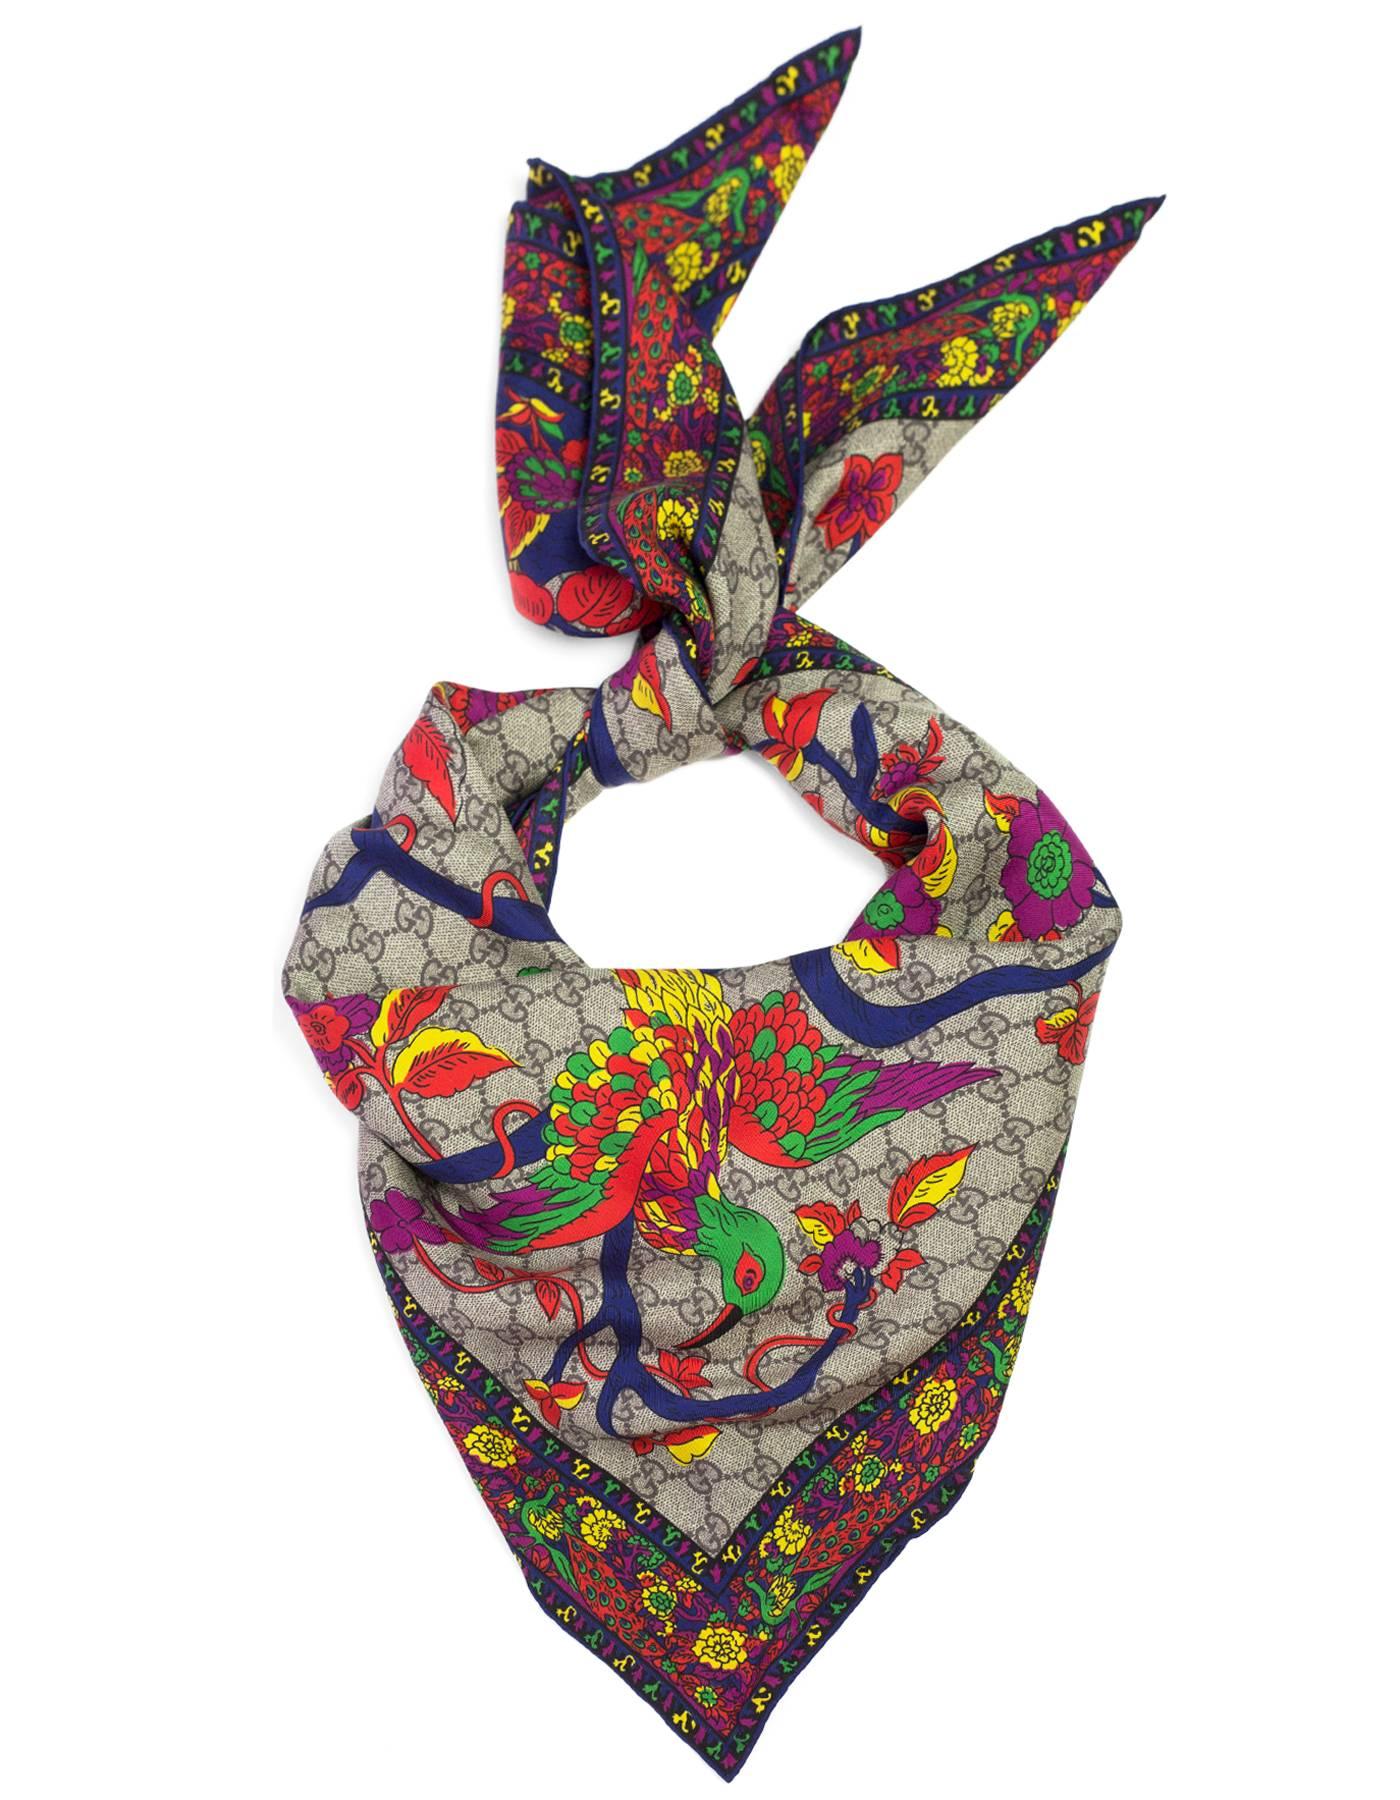 Gucci Monogram Silk Scarf with Bird/Floral Pattern

Made In: Italy
Color: Multi
Composition: 100% Silk
Retail Price: $395 + tax
Overall Condition: Excellent pre-owned condition

Measurements:
Length: 34